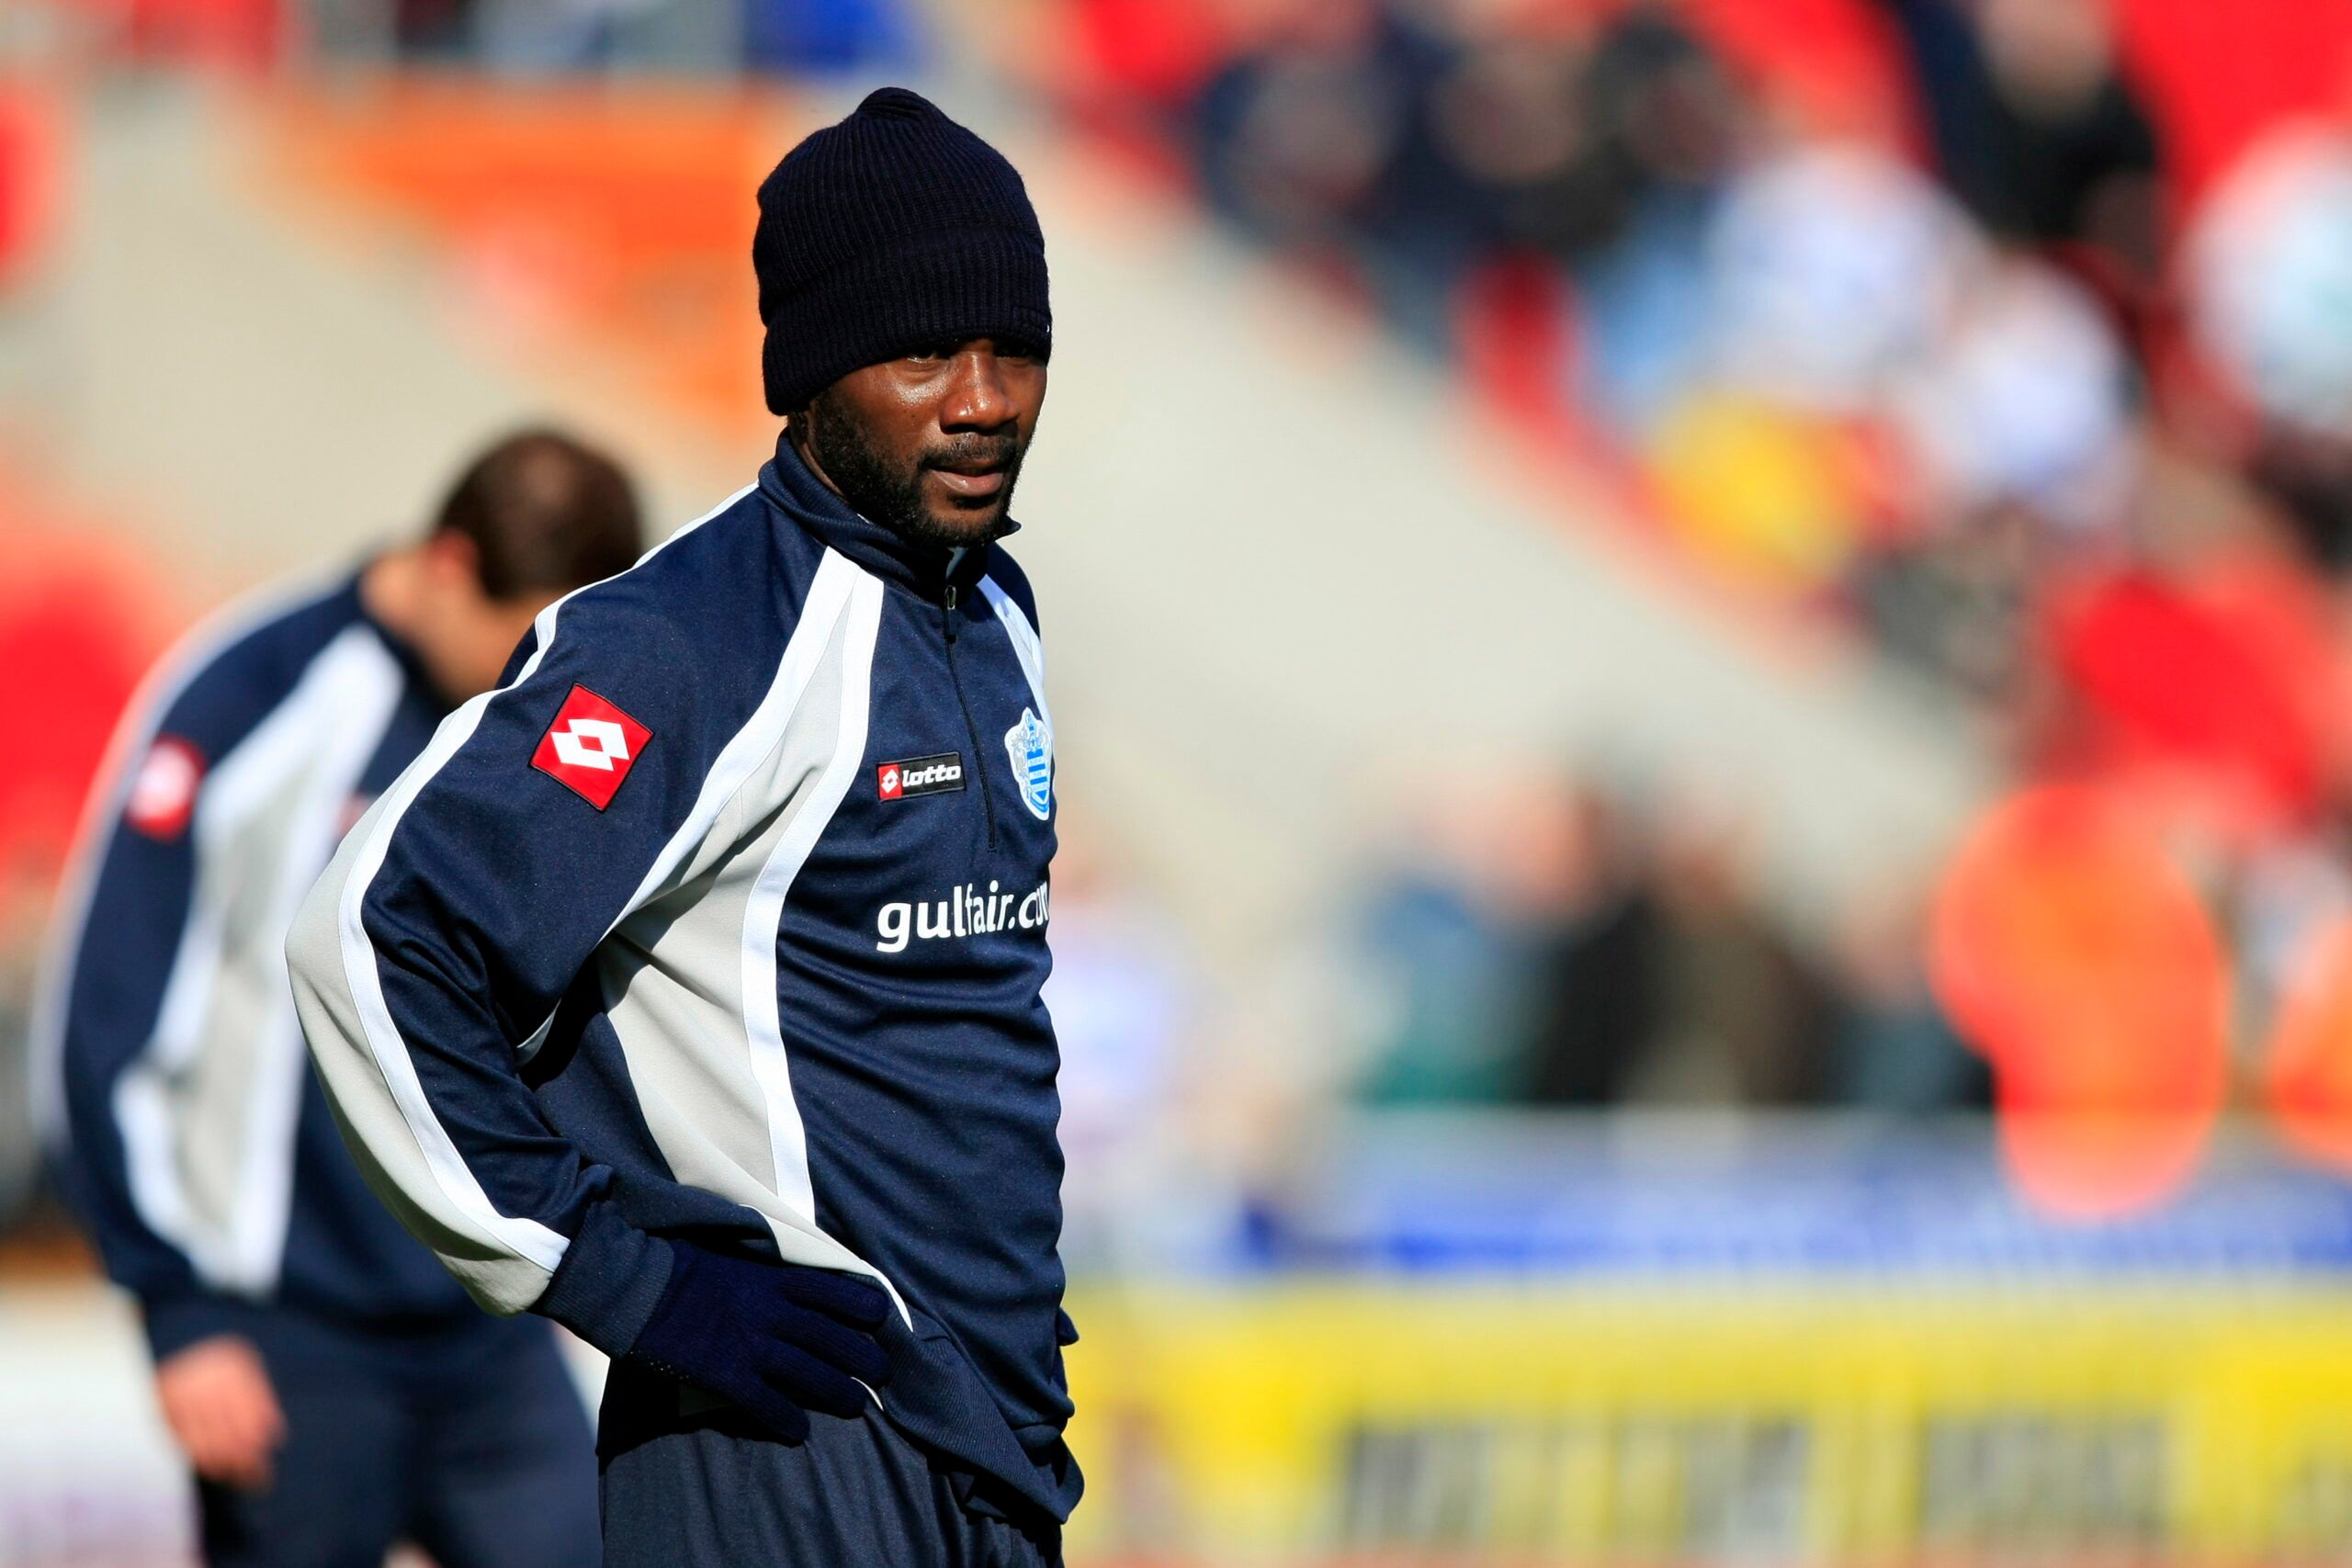 Football - Doncaster Rovers v Queens Park Rangers npower Football League Championship - The Keepmoat Stadium - 10/11 - 19/3/11 
Pascal Chimbonda - Queens Park Rangers during warm up 
Mandatory Credit: Action Images / Ian Smith